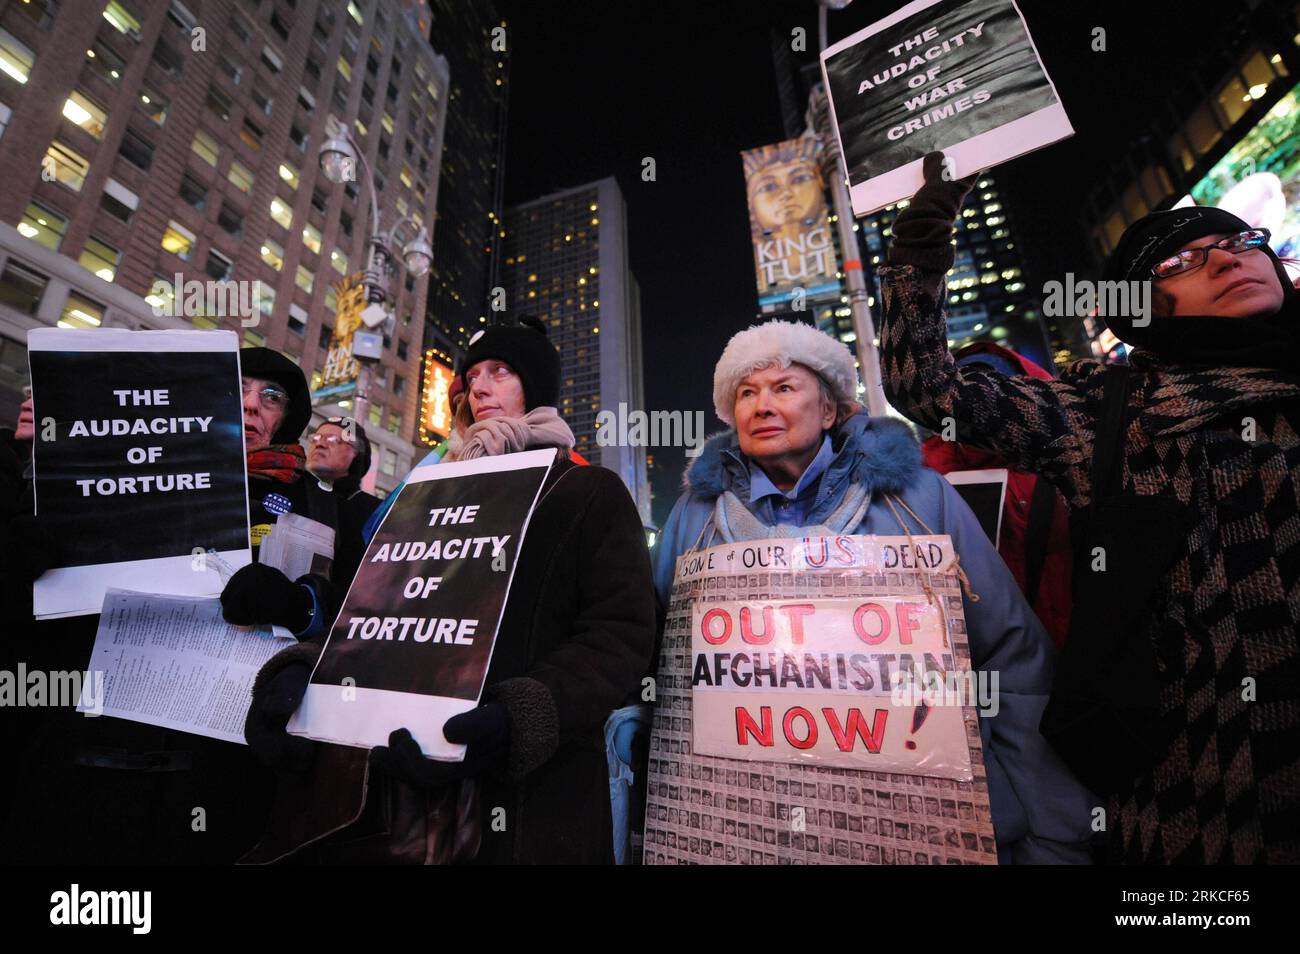 Bildnummer: 54756995  Datum: 16.12.2010  Copyright: imago/Xinhua (101217) -- NEW YORK, Dec. 17, 2010 (Xinhua) -- Protestors participate an anti-war demonstration against the statement delivered by U.S. President on the Afghanistan-Pakistan Annual Review at the Times Square in New York, the United States, Dec. 16, 2010.  (Xinhua/Shen Hong) (zyw) US-NEW YORK-TIMES SQUARE-DEMO PUBLICATIONxNOTxINxCHN Politik Gesellschaft Demo Protest kbdig xcb 2010 quer premiumd o0 Kriegsgegner    Bildnummer 54756995 Date 16 12 2010 Copyright Imago XINHUA  New York DEC 17 2010 XINHUA protestors participate to Anti Stock Photo